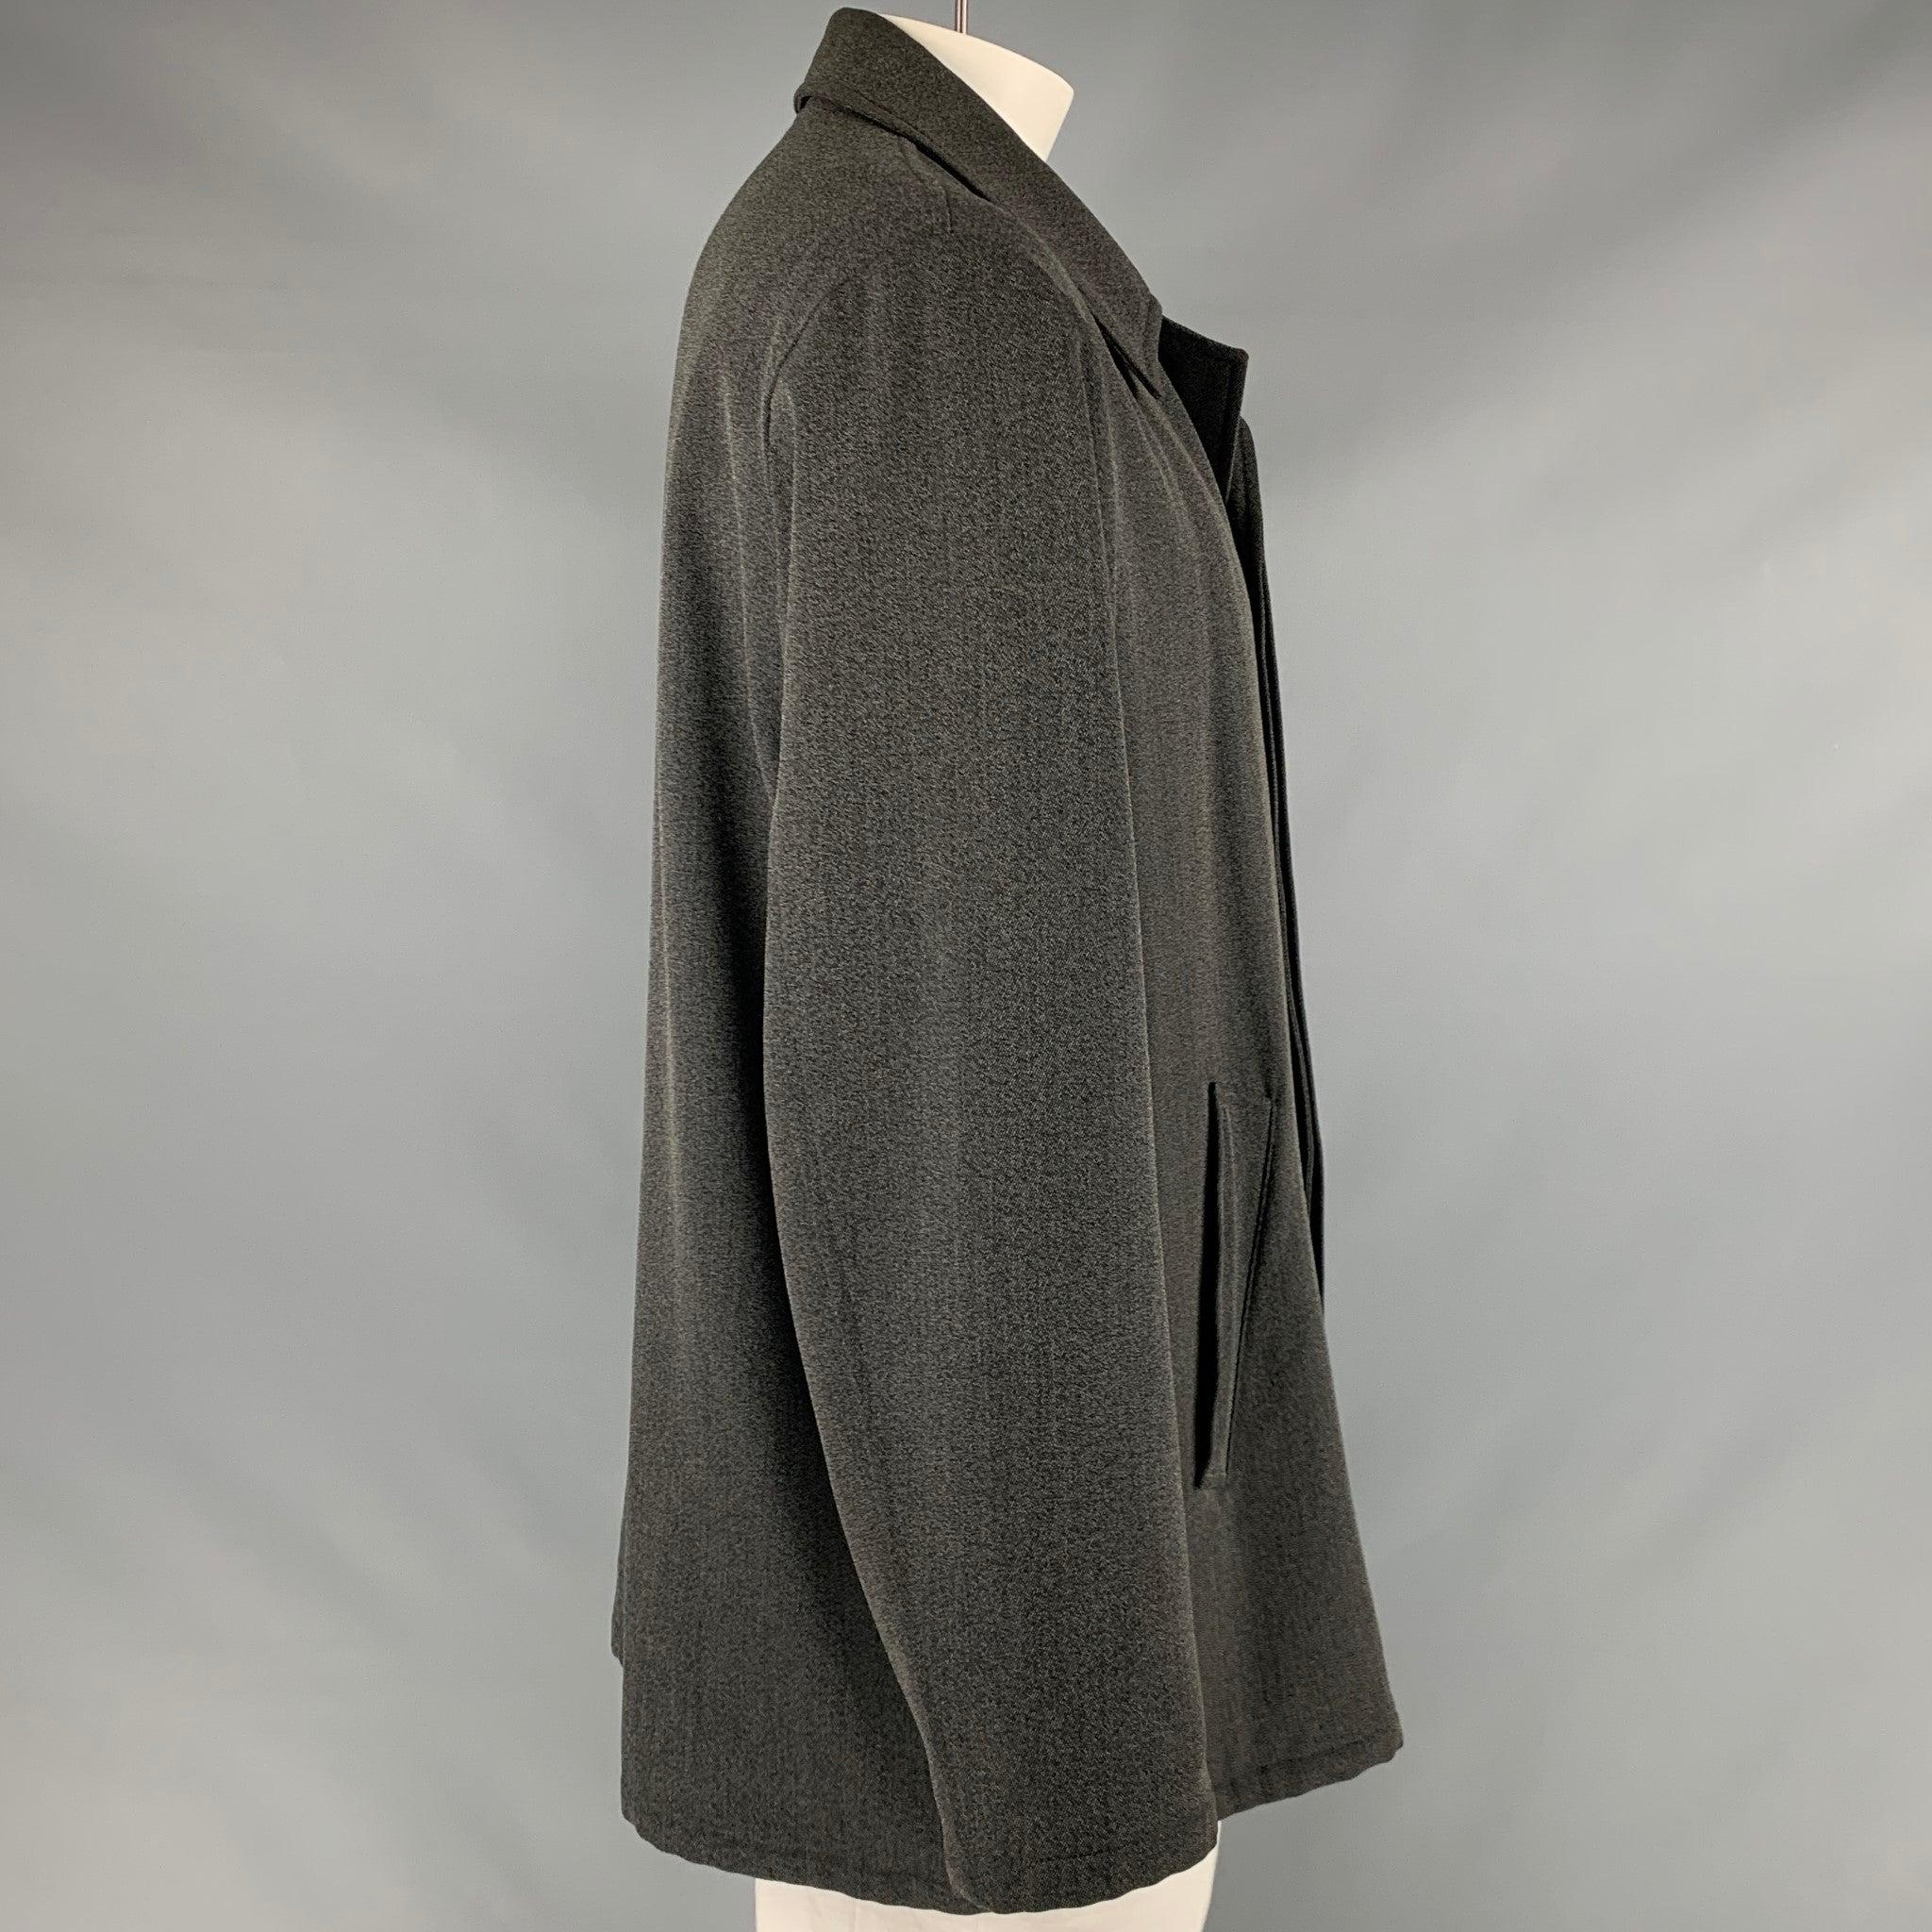 ARMANI COLLEZIONI coat
in a grey and black wool cotton blend sport fabric featuring nailhead pattern, single breasted style, two pockets, and a hidden button closure.Good Pre-Owned Condition. Moderate signs of wear. As is. 

Marked:   42